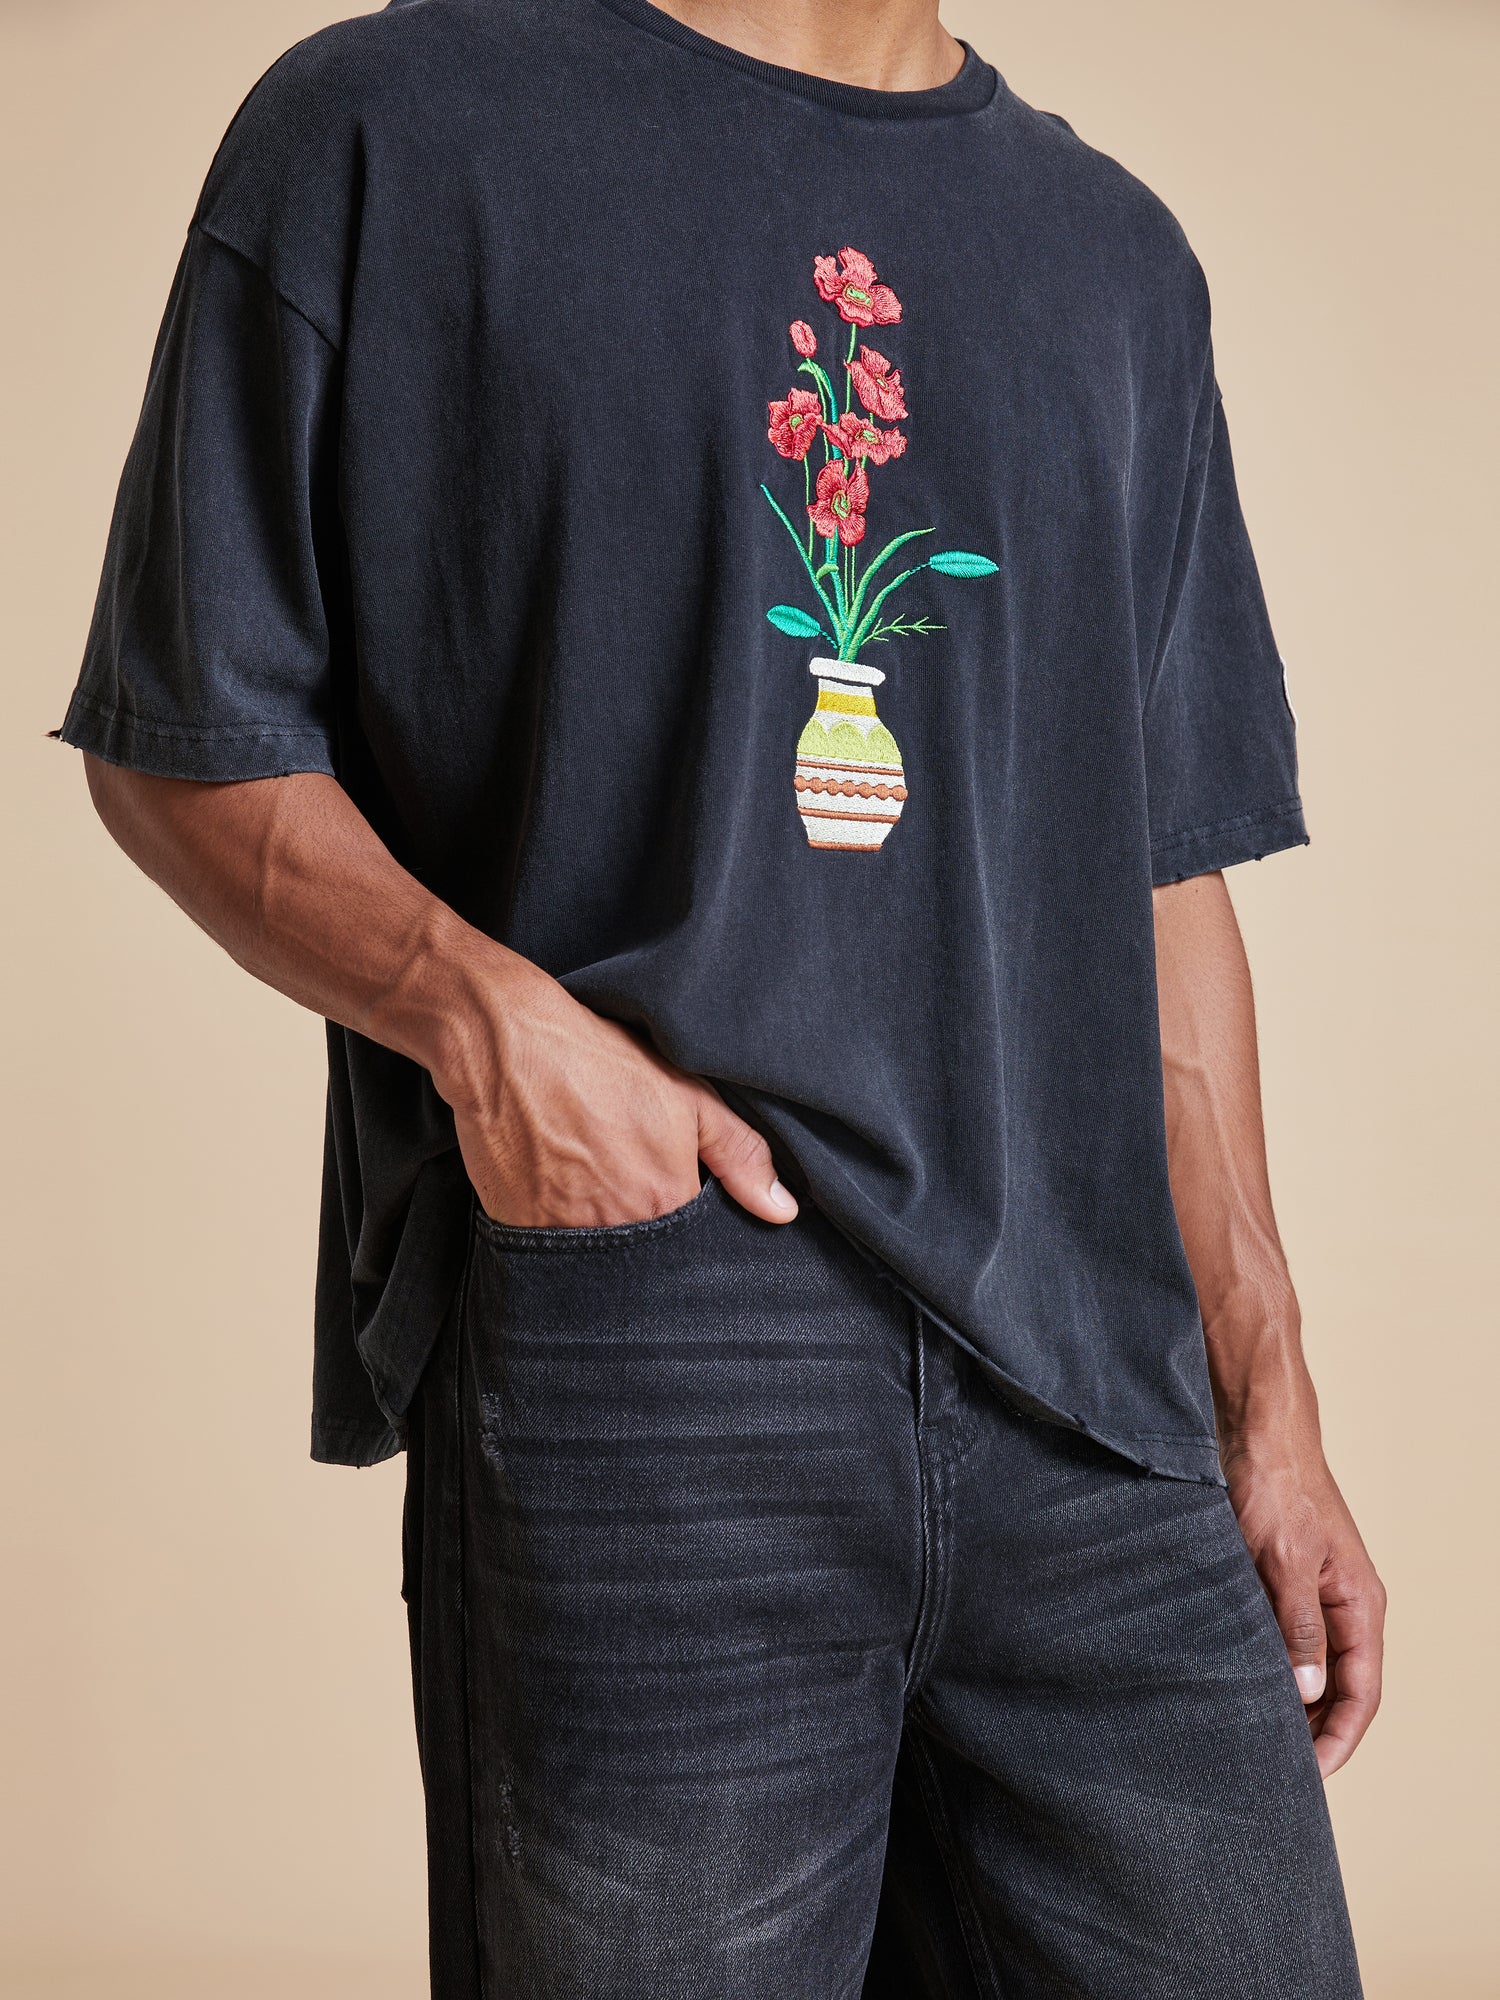 A man wearing a Found Flowers Vase tee.